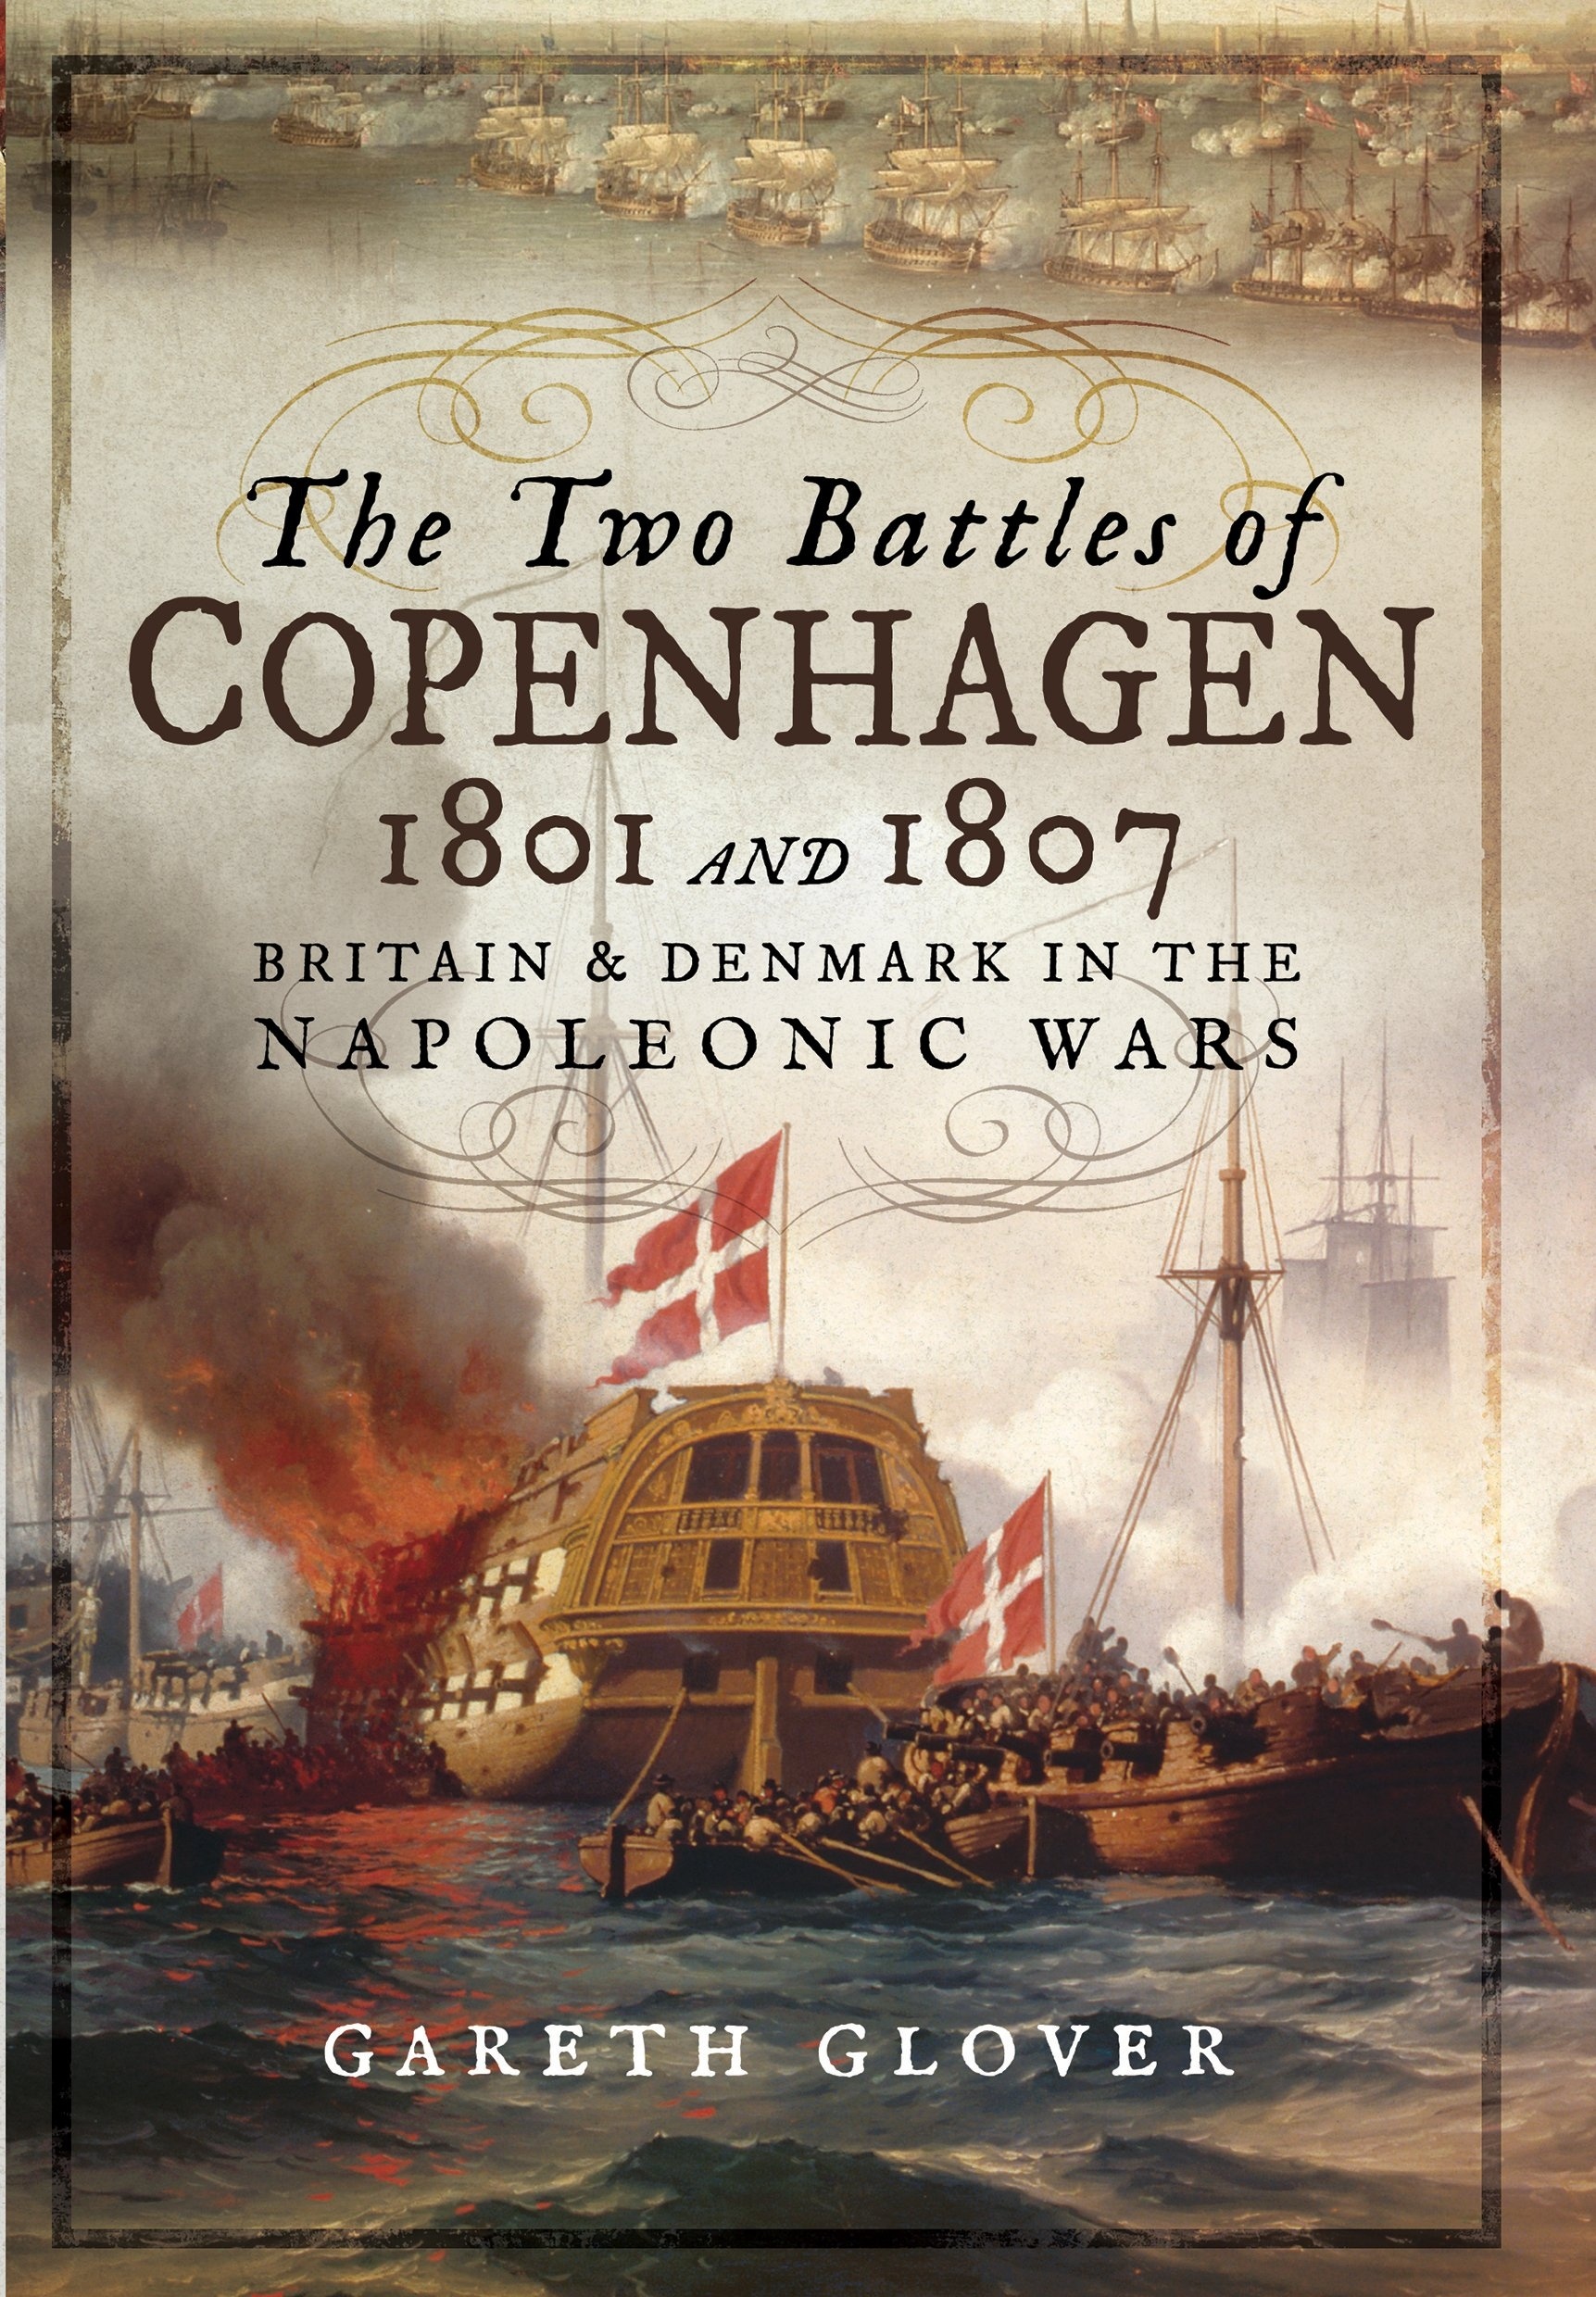 The Two Battles of Copenhagen 1801 and 1807 "Britain and Denmark in the Napoleonic Wars"